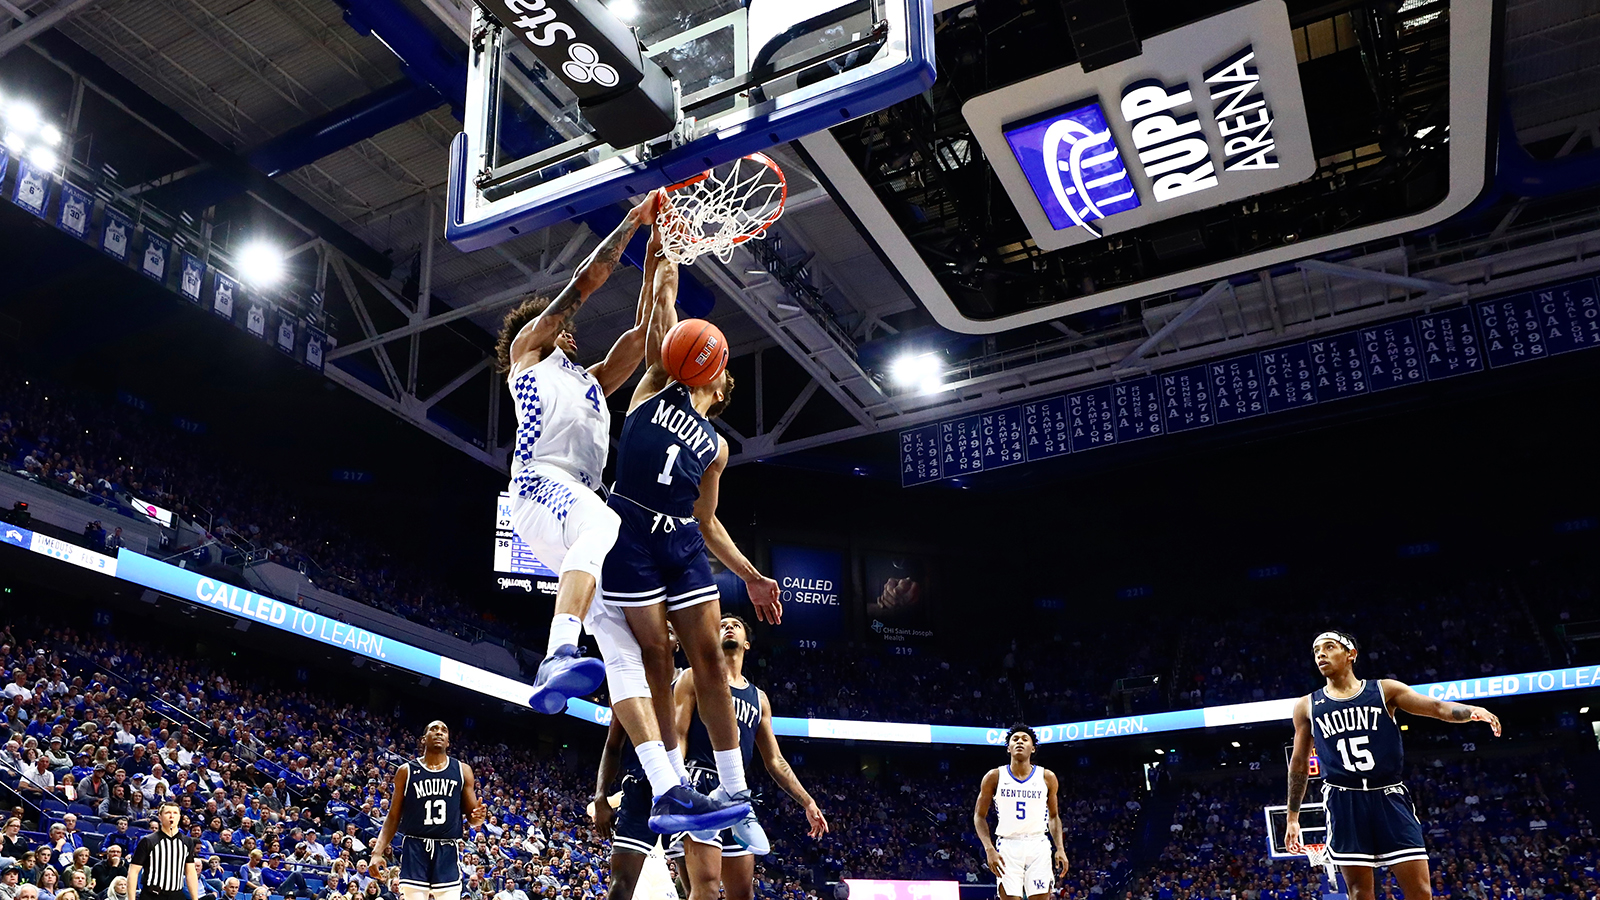 Big Second Half Lifts Kentucky Past Mount St. Mary's